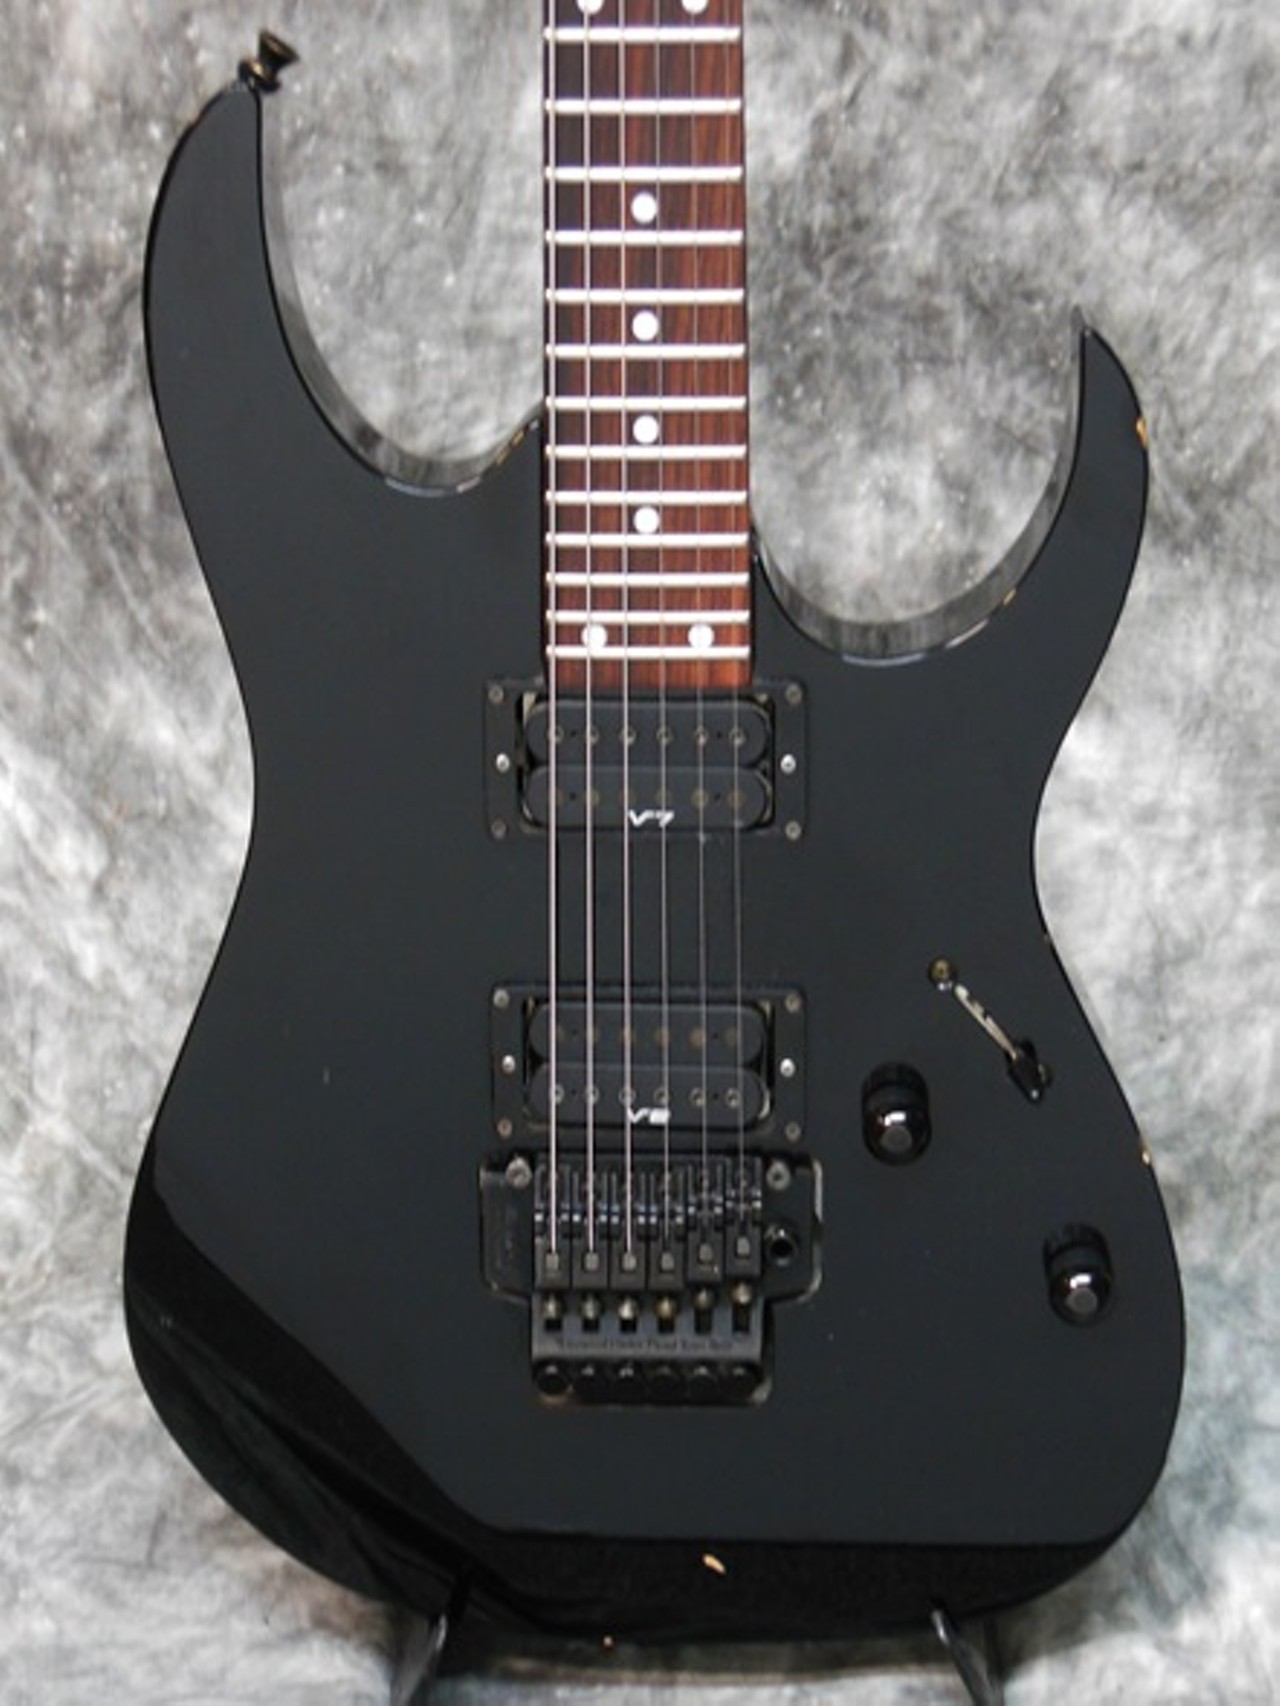 $369 - 1997 Ibanez RG Japan-Used and in good condition with light wear. -Space Tone 416 Austin Hwy San Antonio, Texas 78209. www.spacetonemusic.com